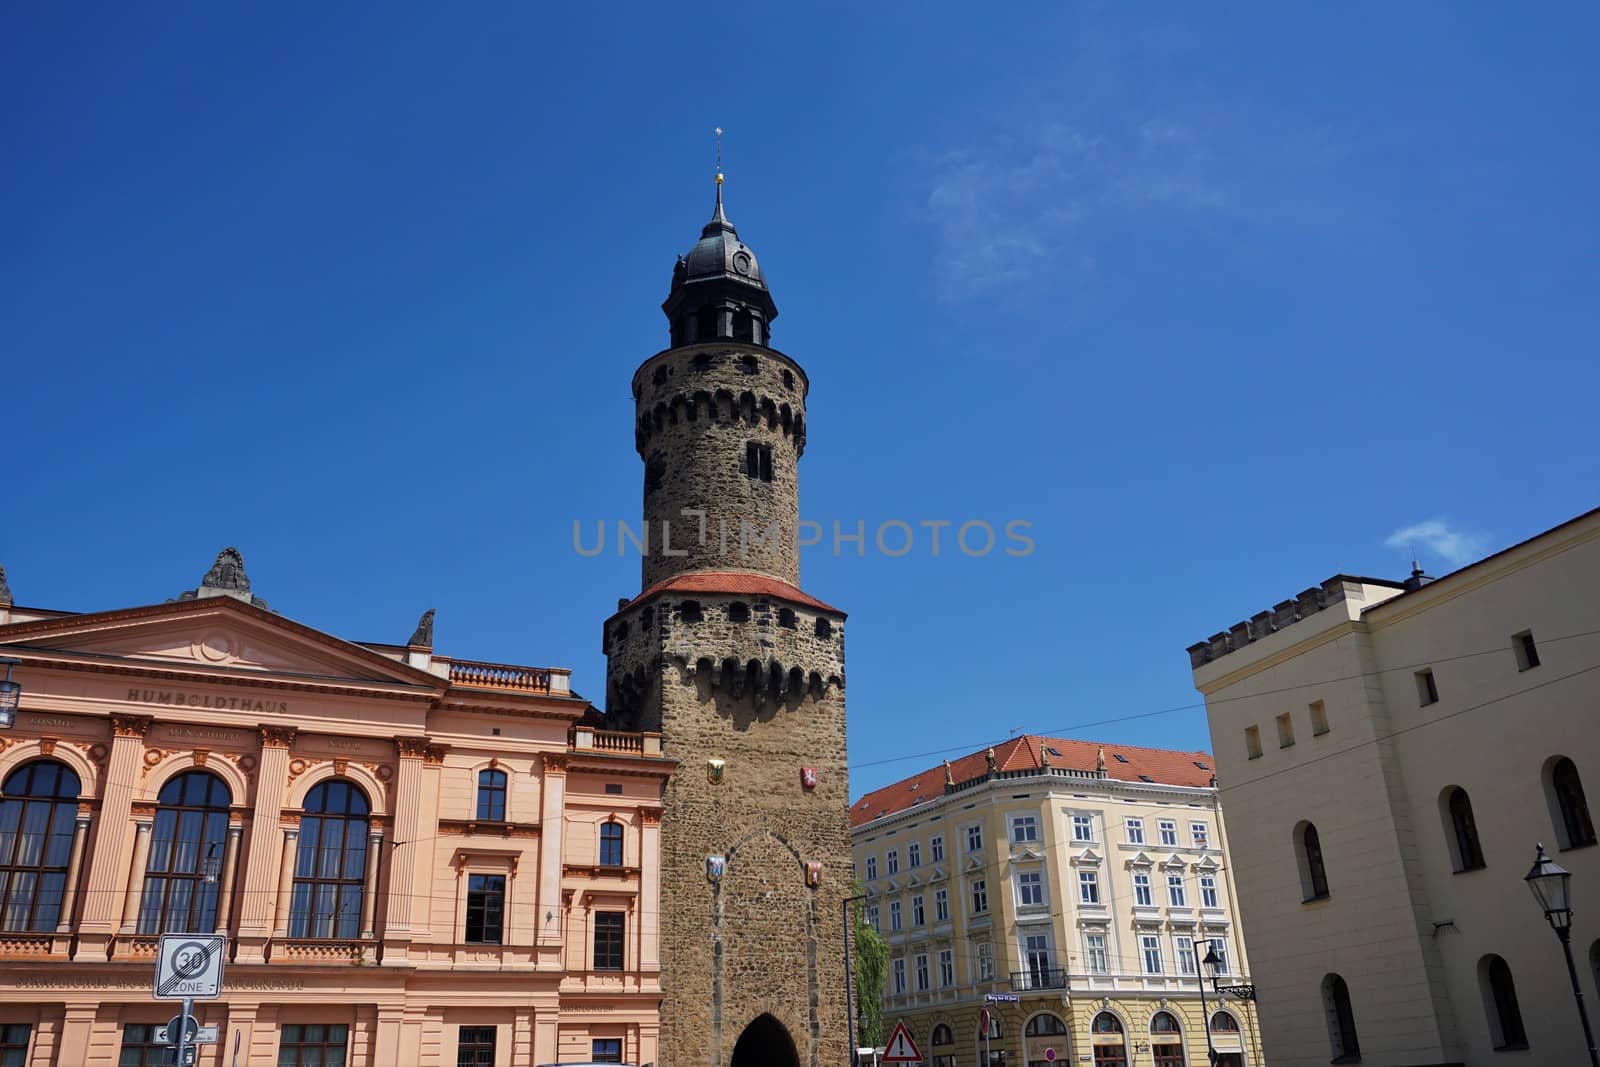 Reichenbacher Turm surrounded by different buildings in Goerlitz by pisces2386